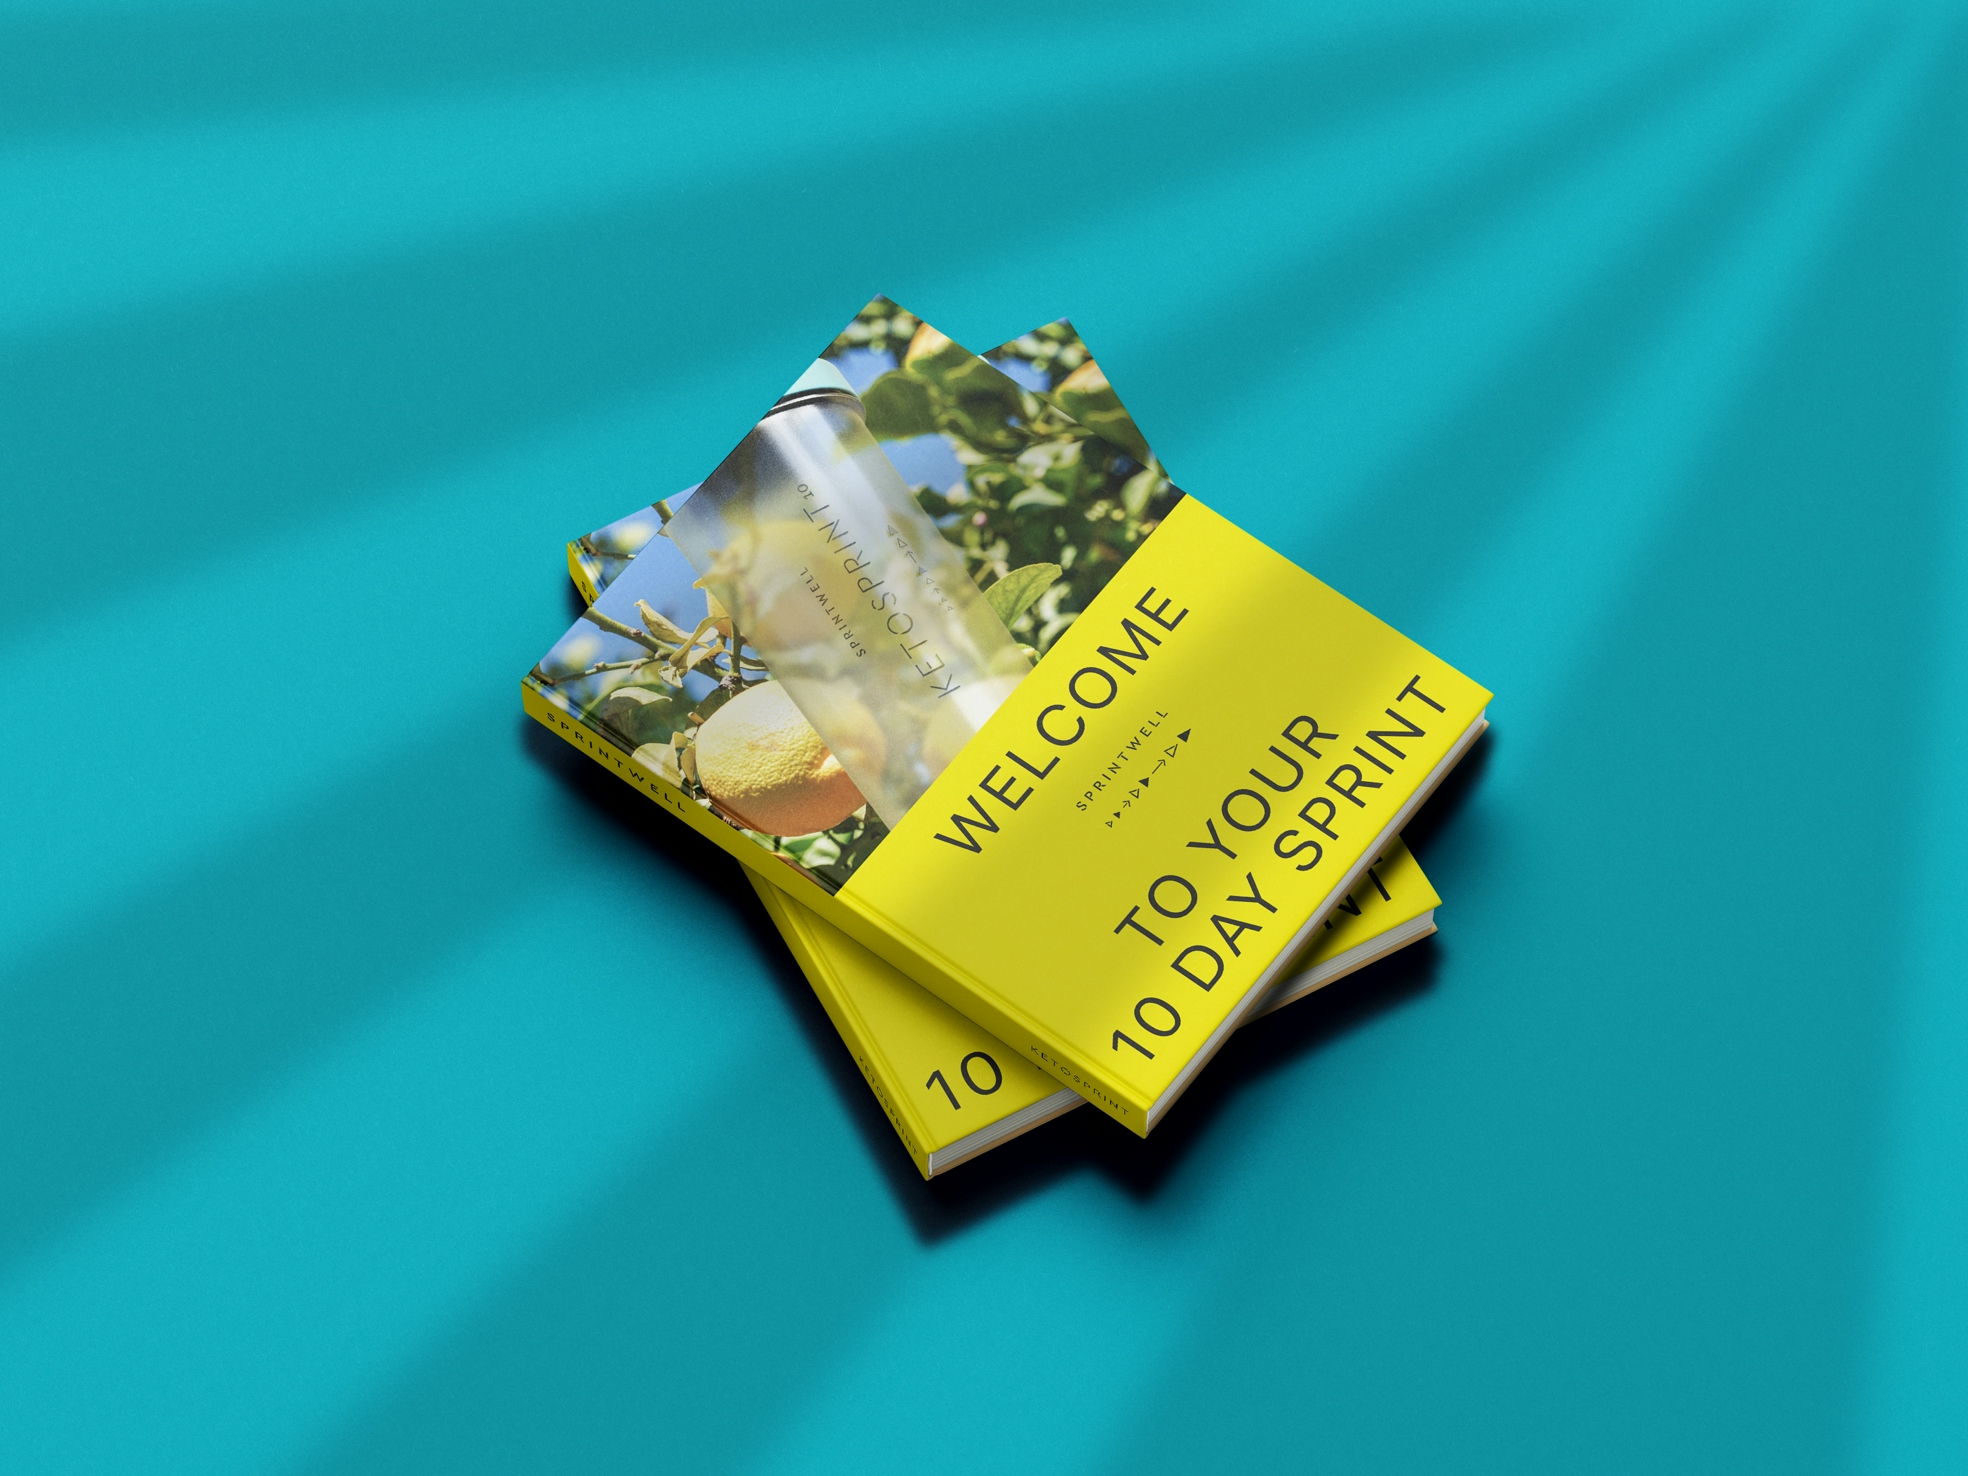 Two books sit on a teal background. The book's title “Welcome to your 10 day sprint” sits on a yellow background under a picture of a Sprintwell Ketosprint Keto protein shaker in front of a lemon tree.